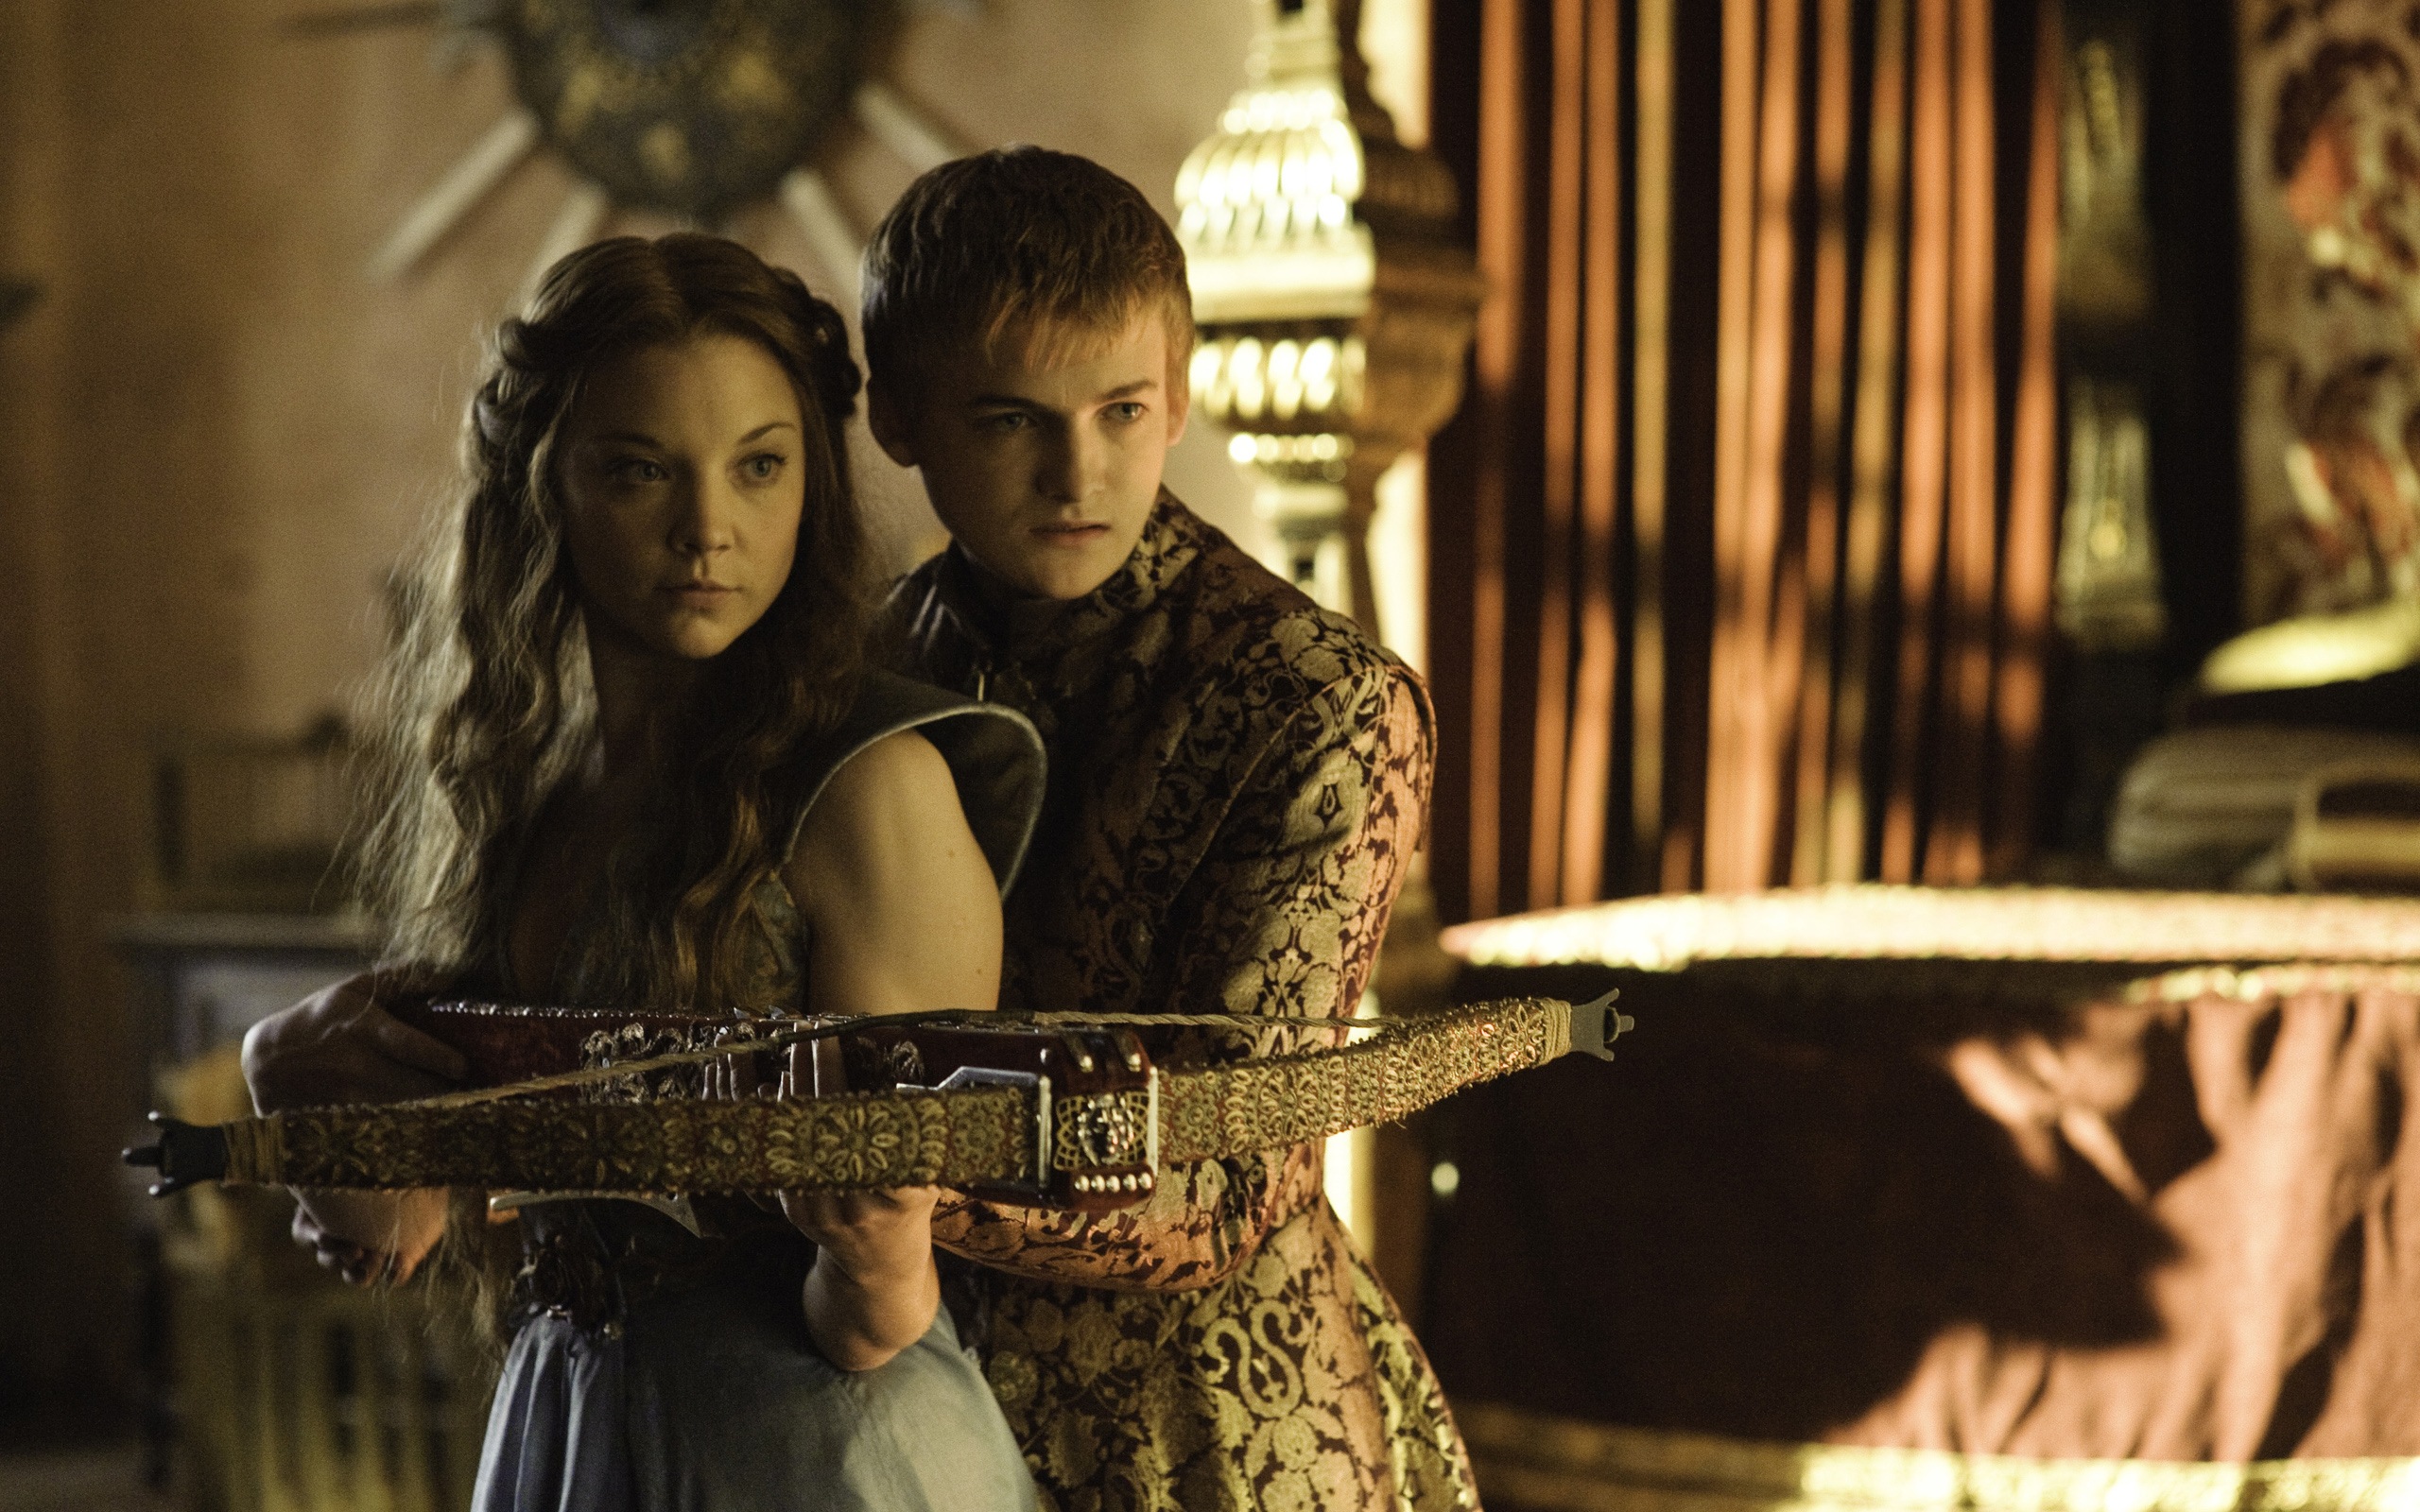 A Song of Ice and Fire: Game of Thrones 冰與火之歌：權力的遊戲高清壁紙 #38 - 2560x1600